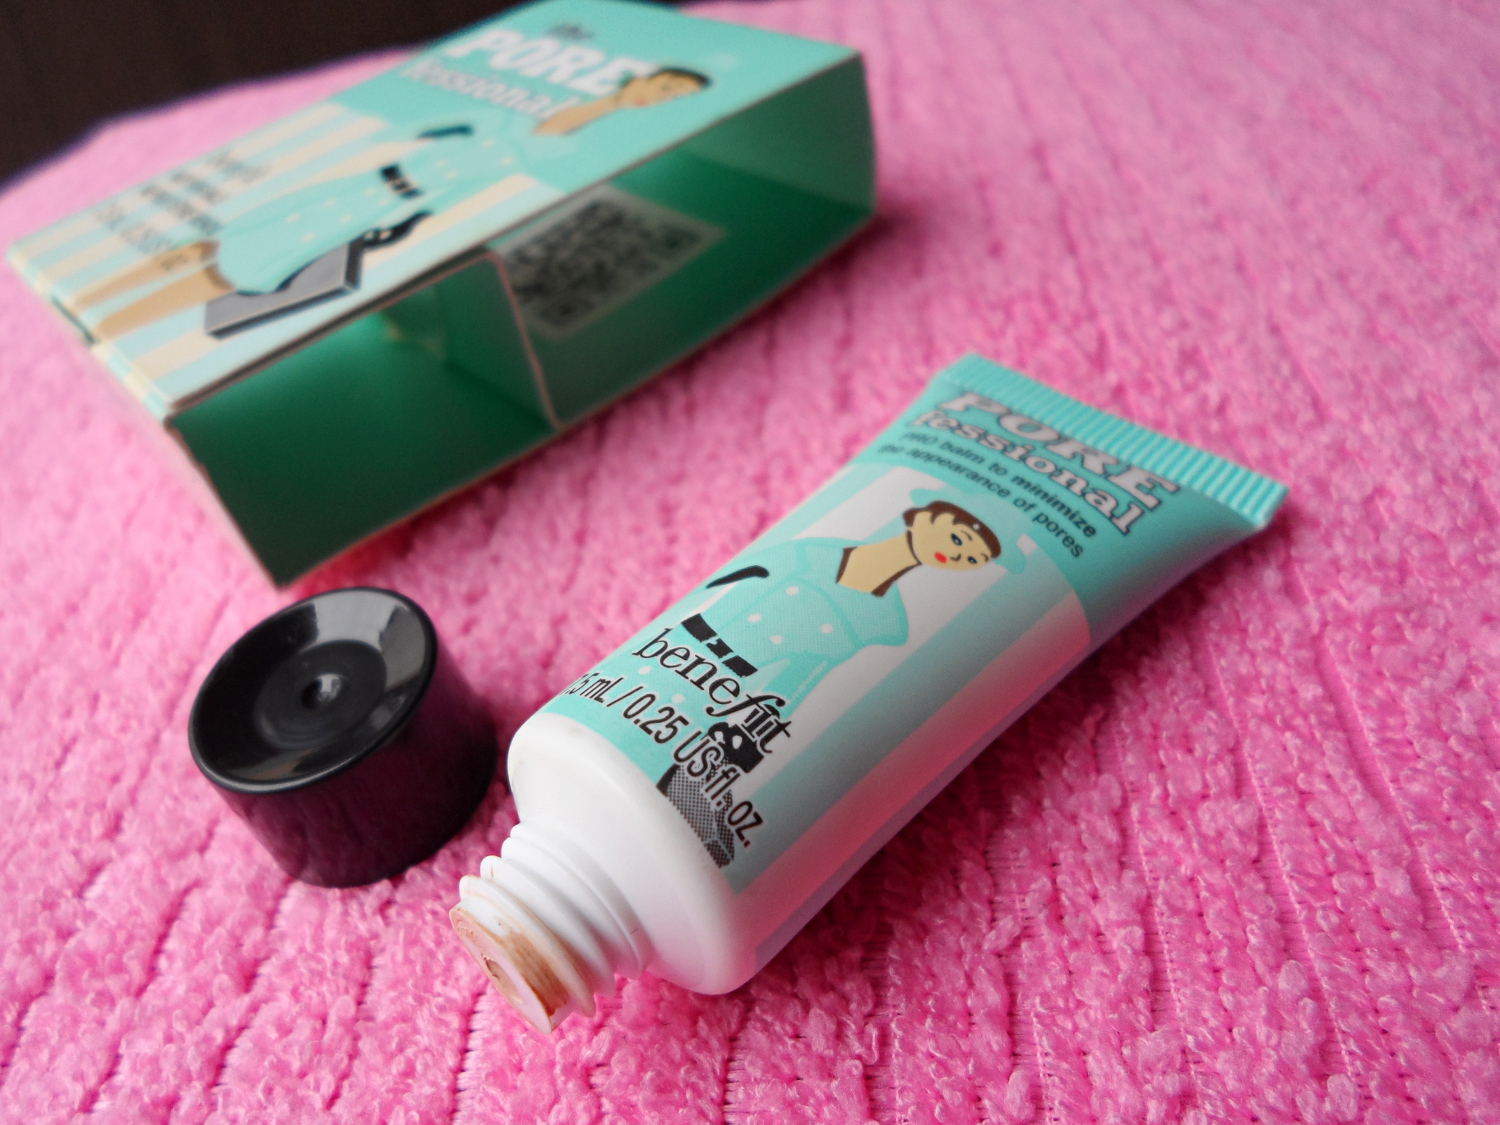 A Skin-Smoothing Primer POREfessional by Benefit Cosmetics